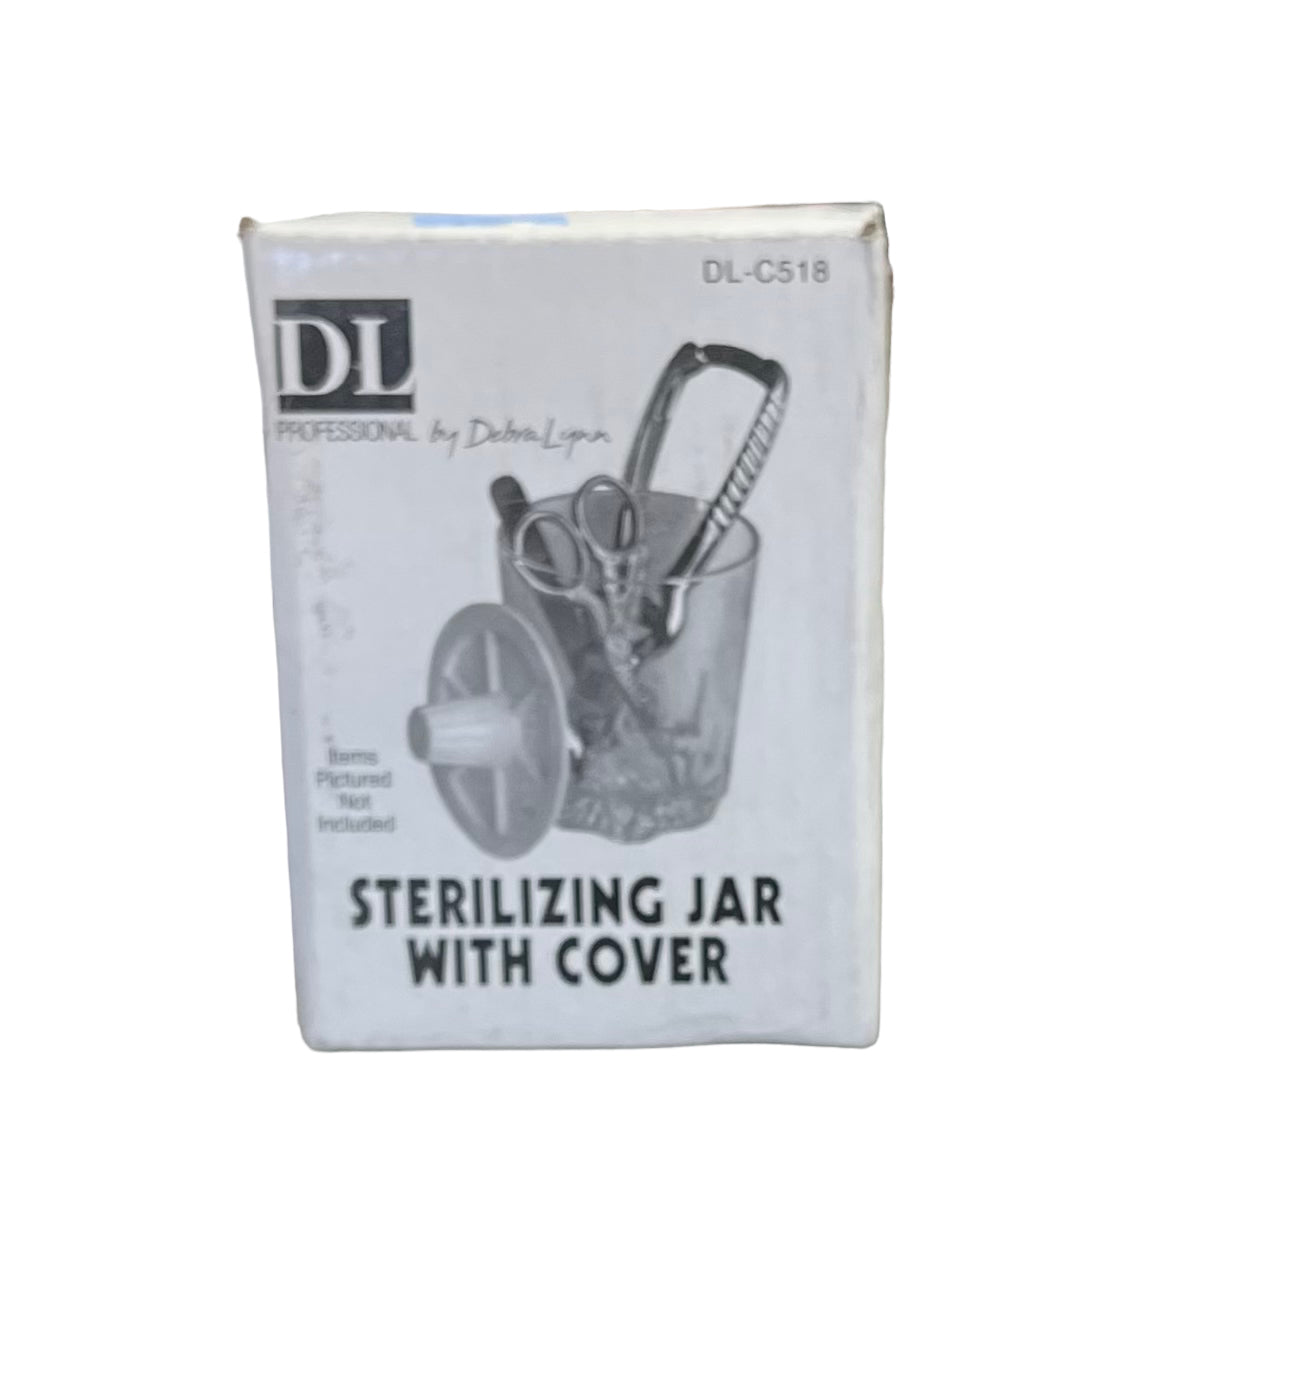 DL Professional Sterilizing Jar with cover